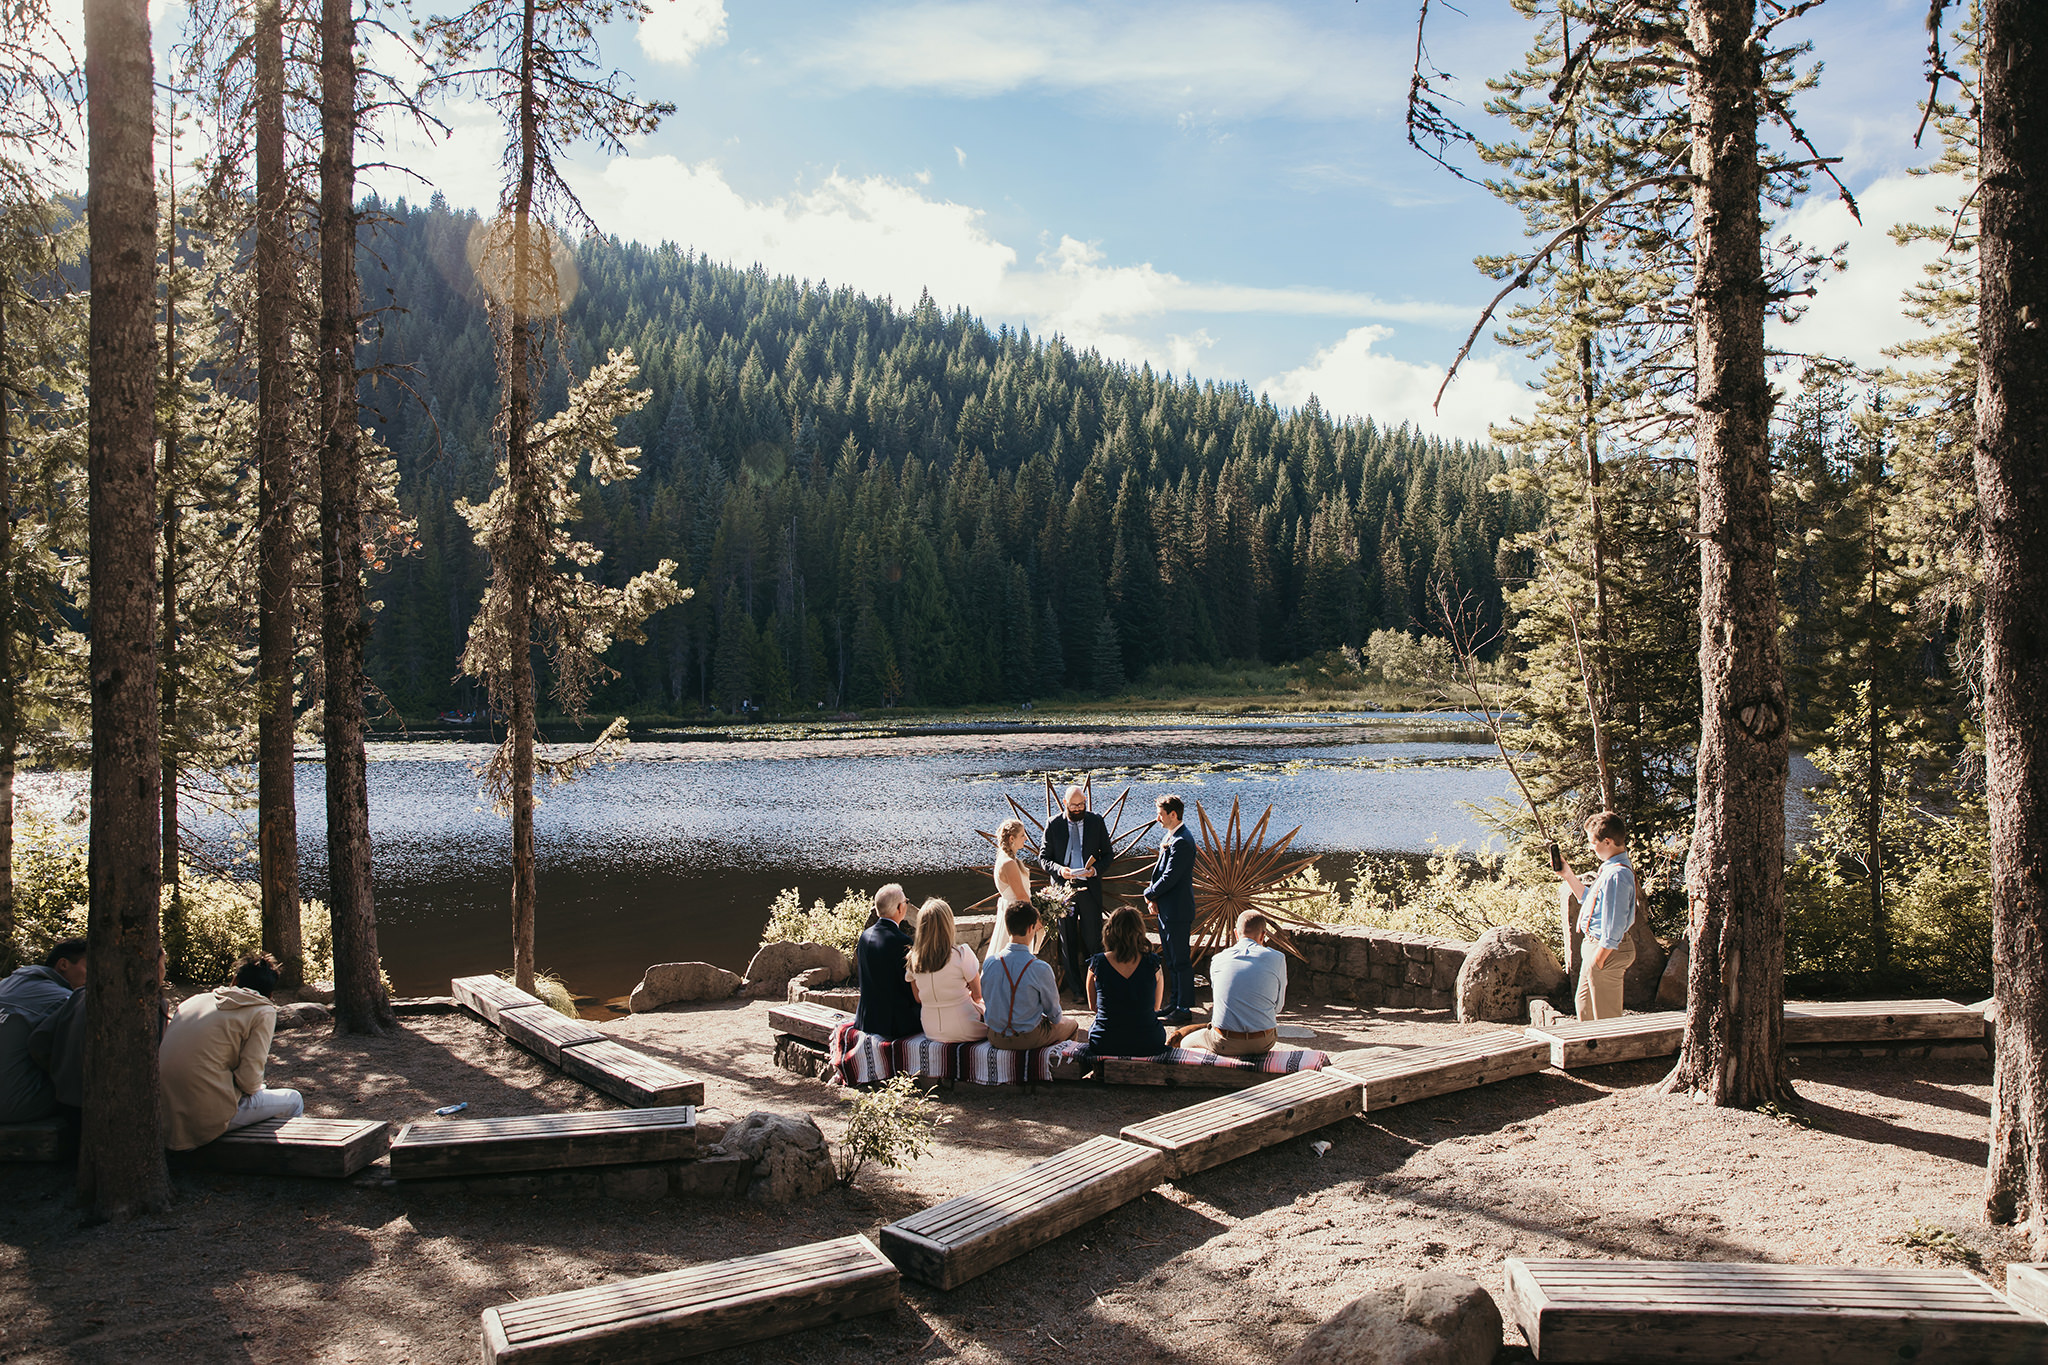 Wedding ceremony at the Trillium Lake amphitheater in the summer